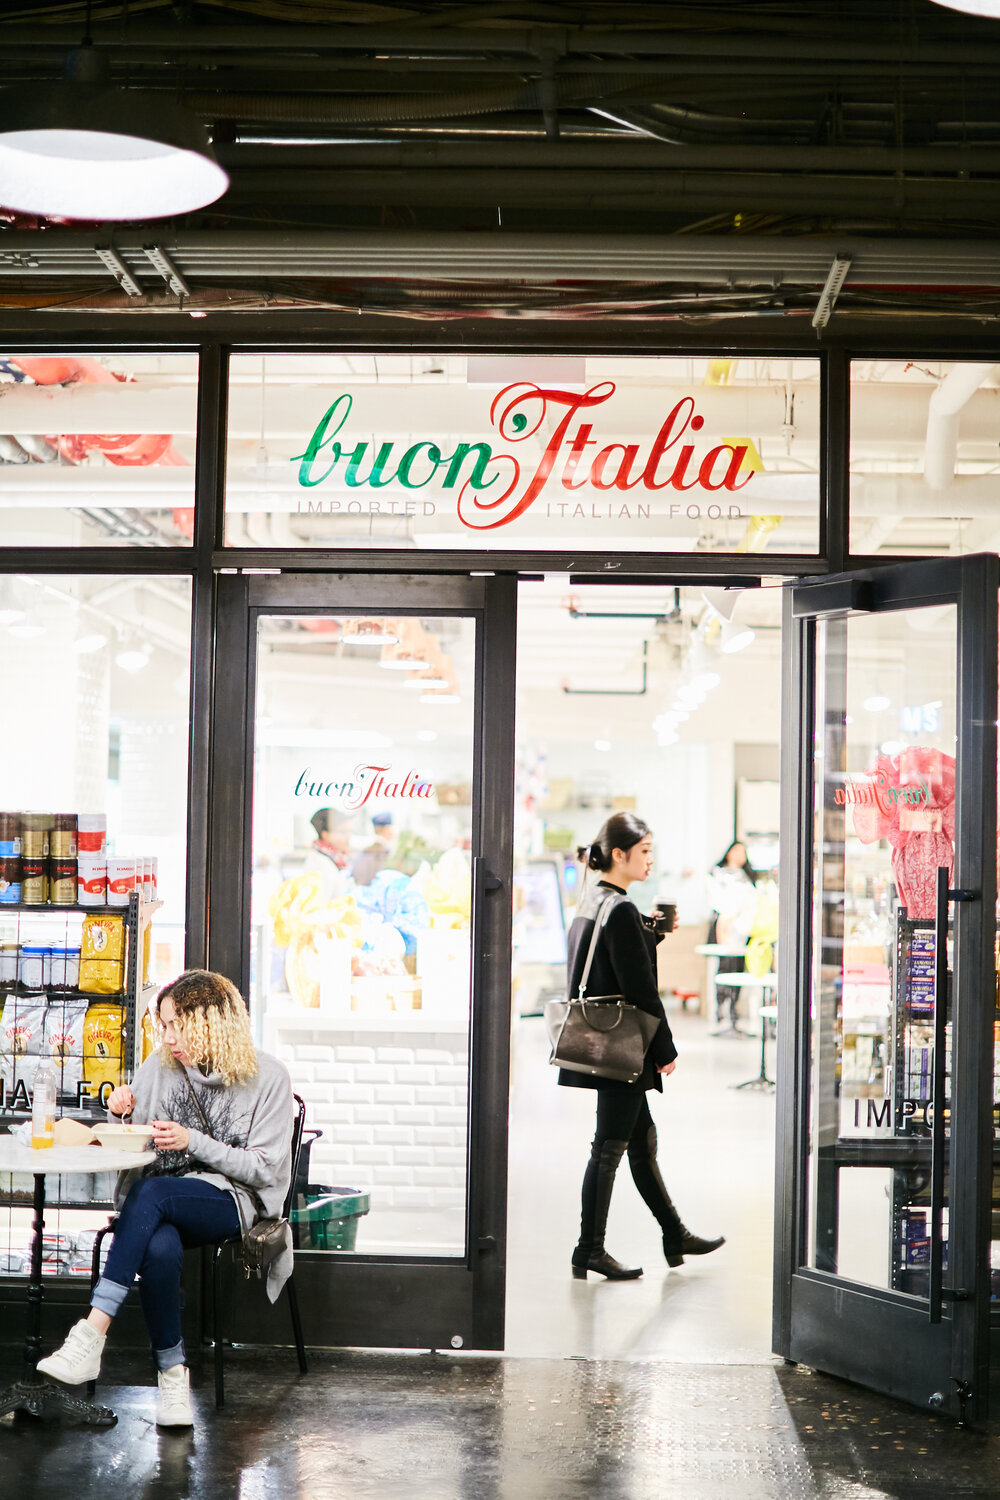 Buon Italia storefront with illuminated store in background with a customer walking in 